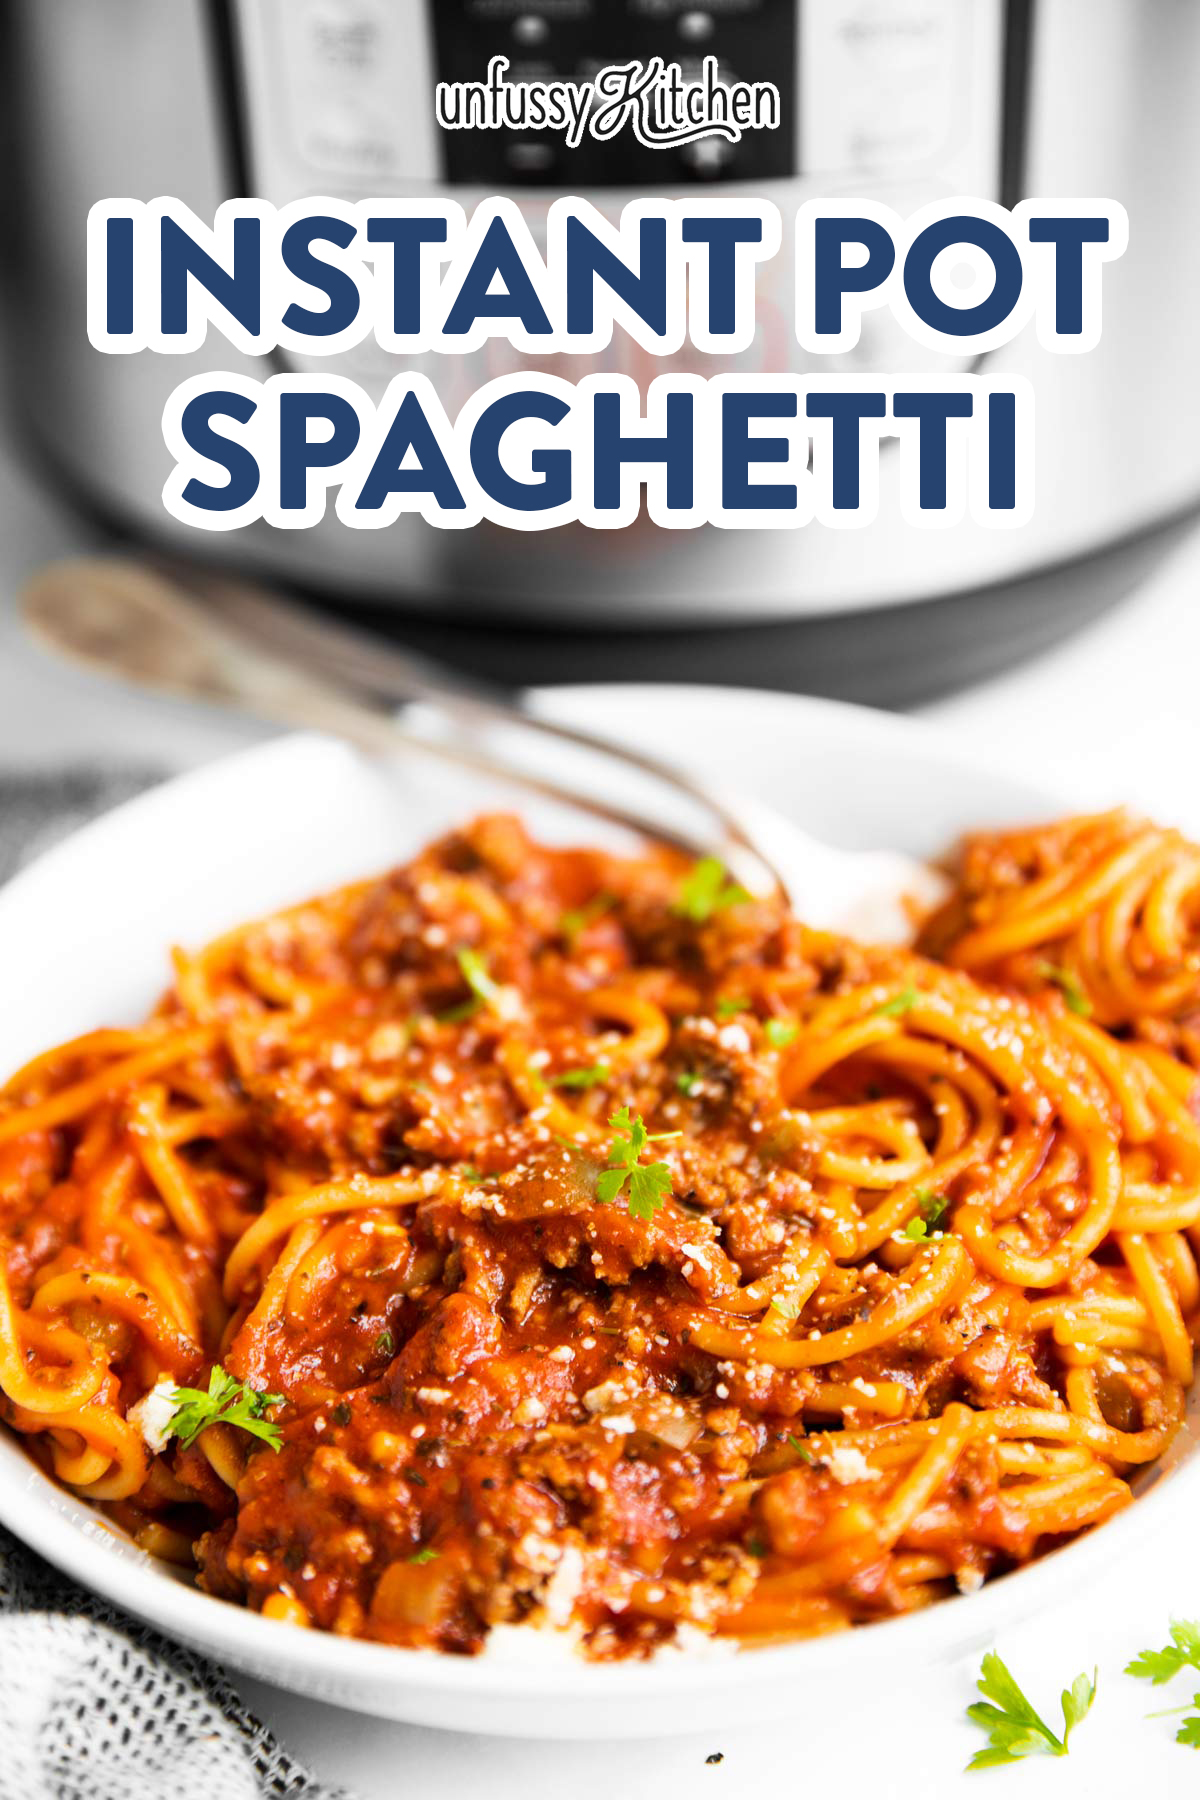 plate with spaghetti and meat sauce in front of instant pot with text overlay